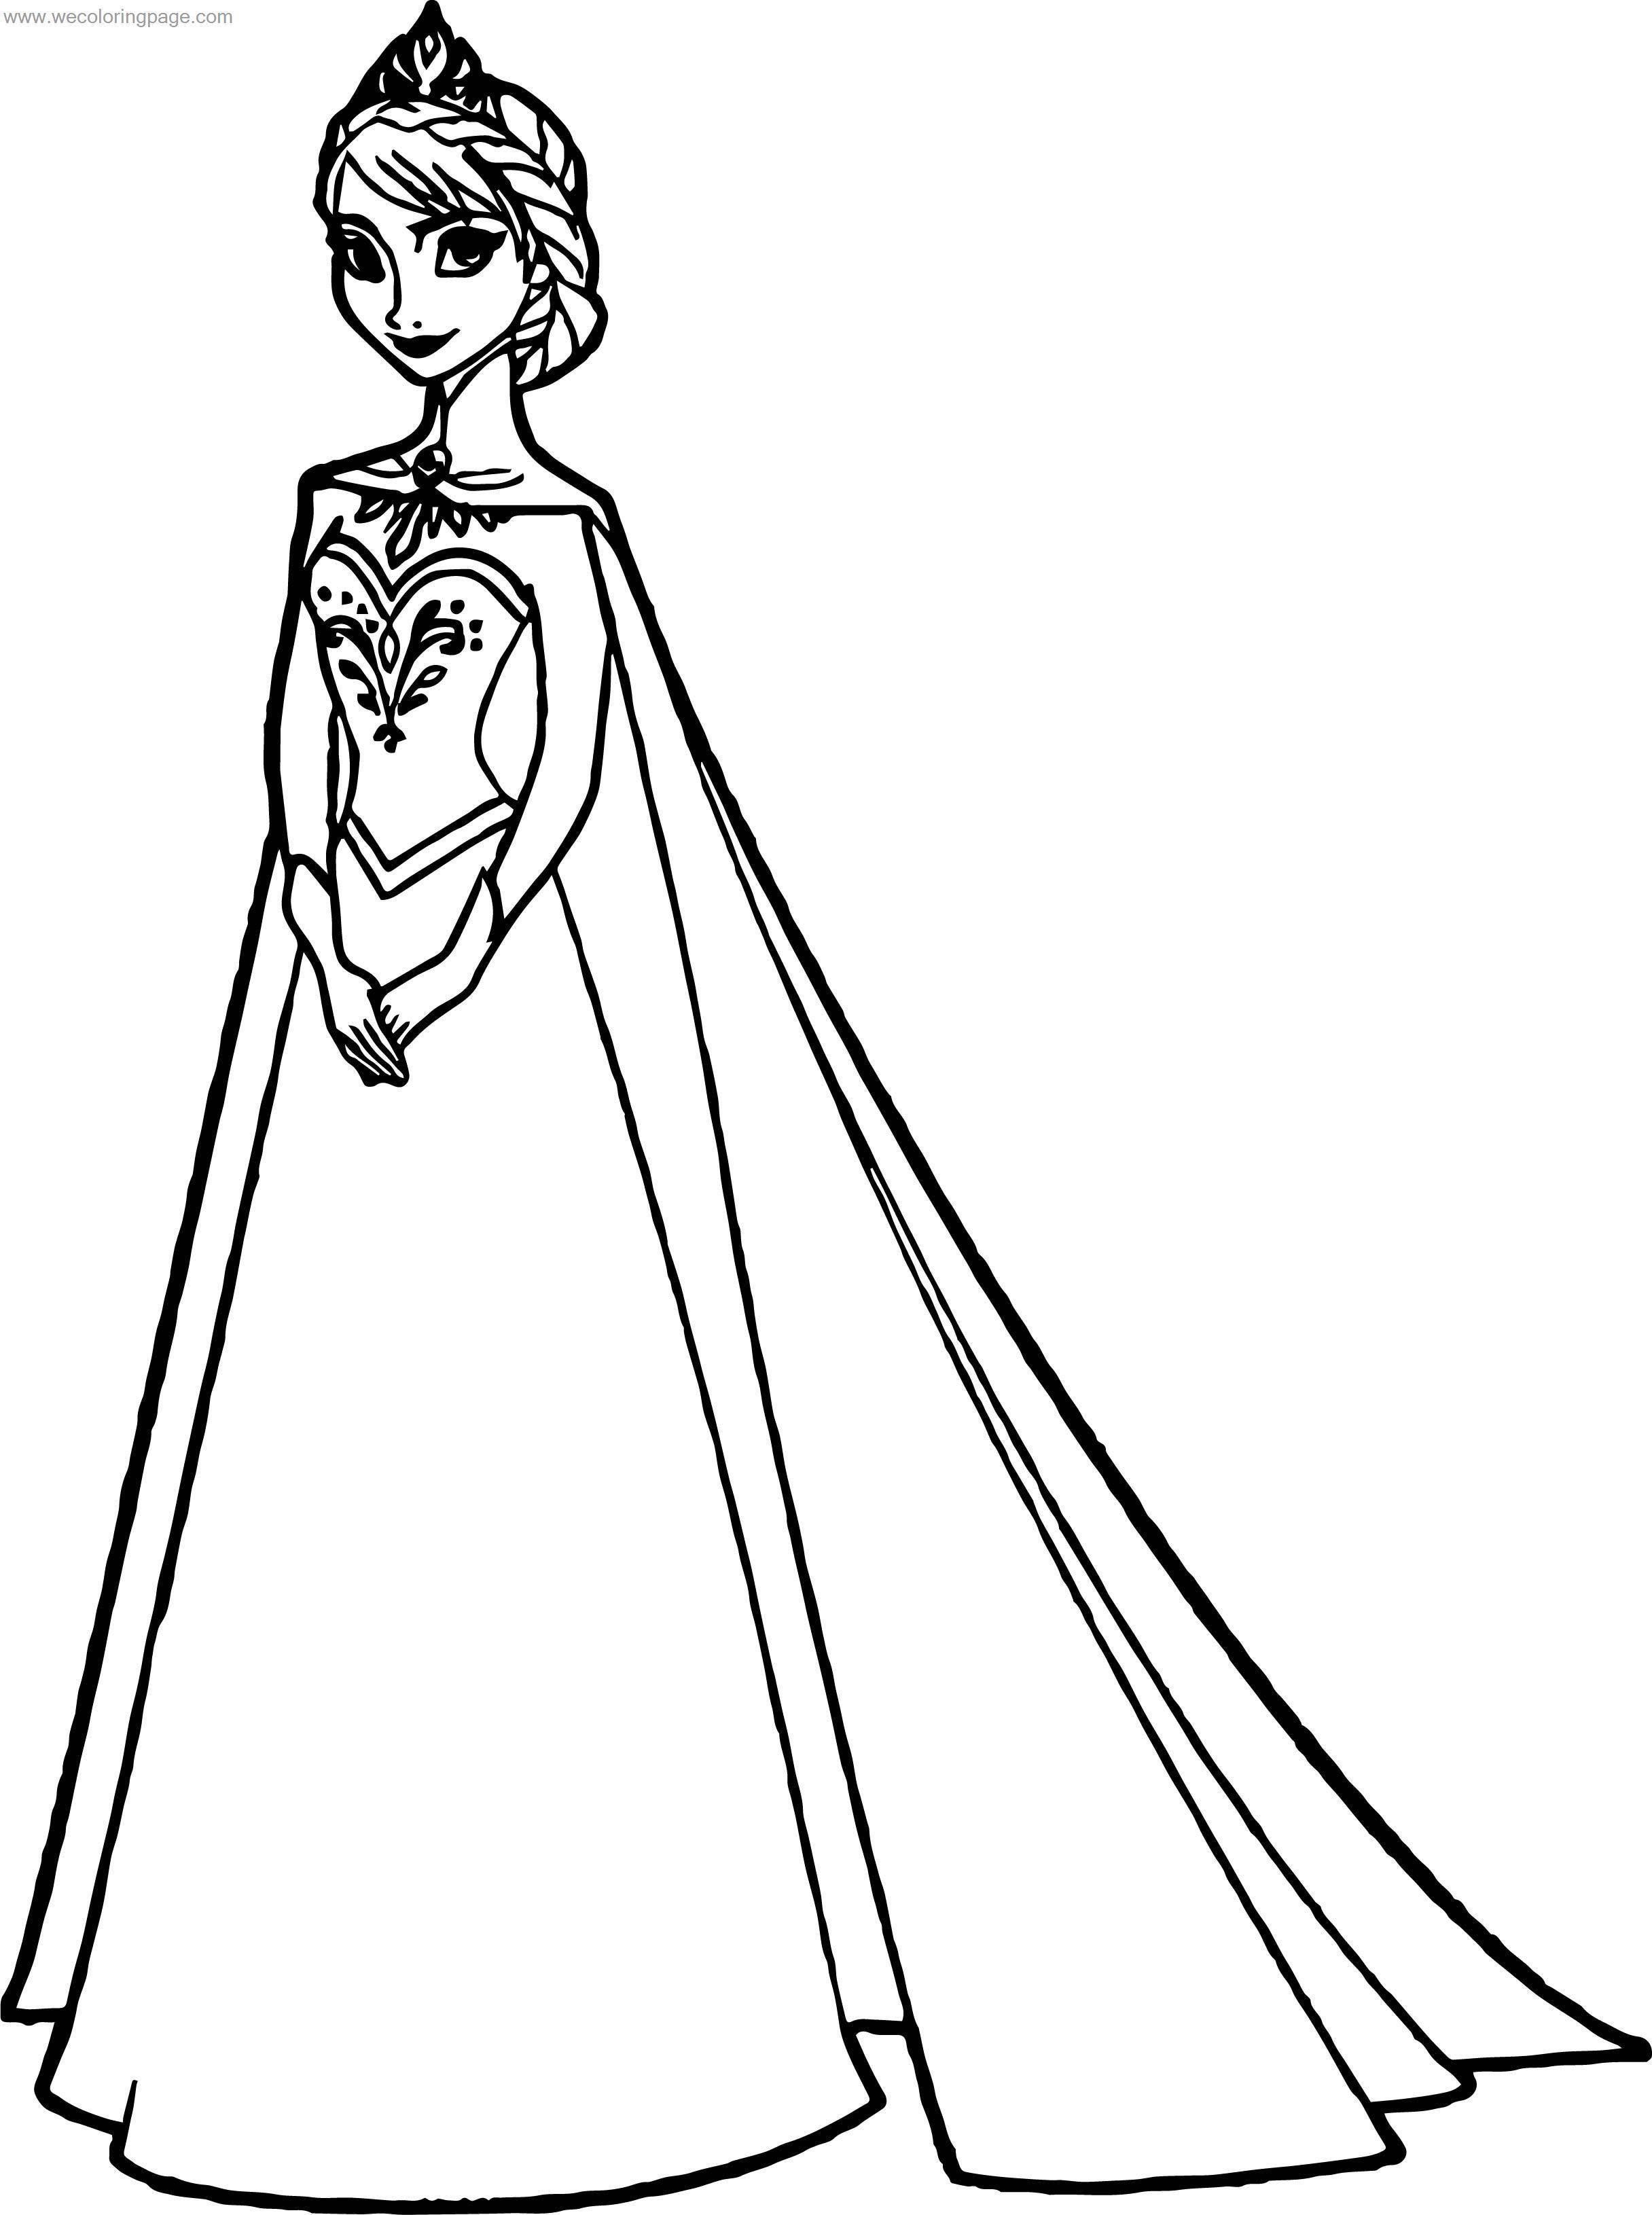 coloring-pages-how-to-draw-elsa-from-frozen-2-frozen-coloring-cartoon